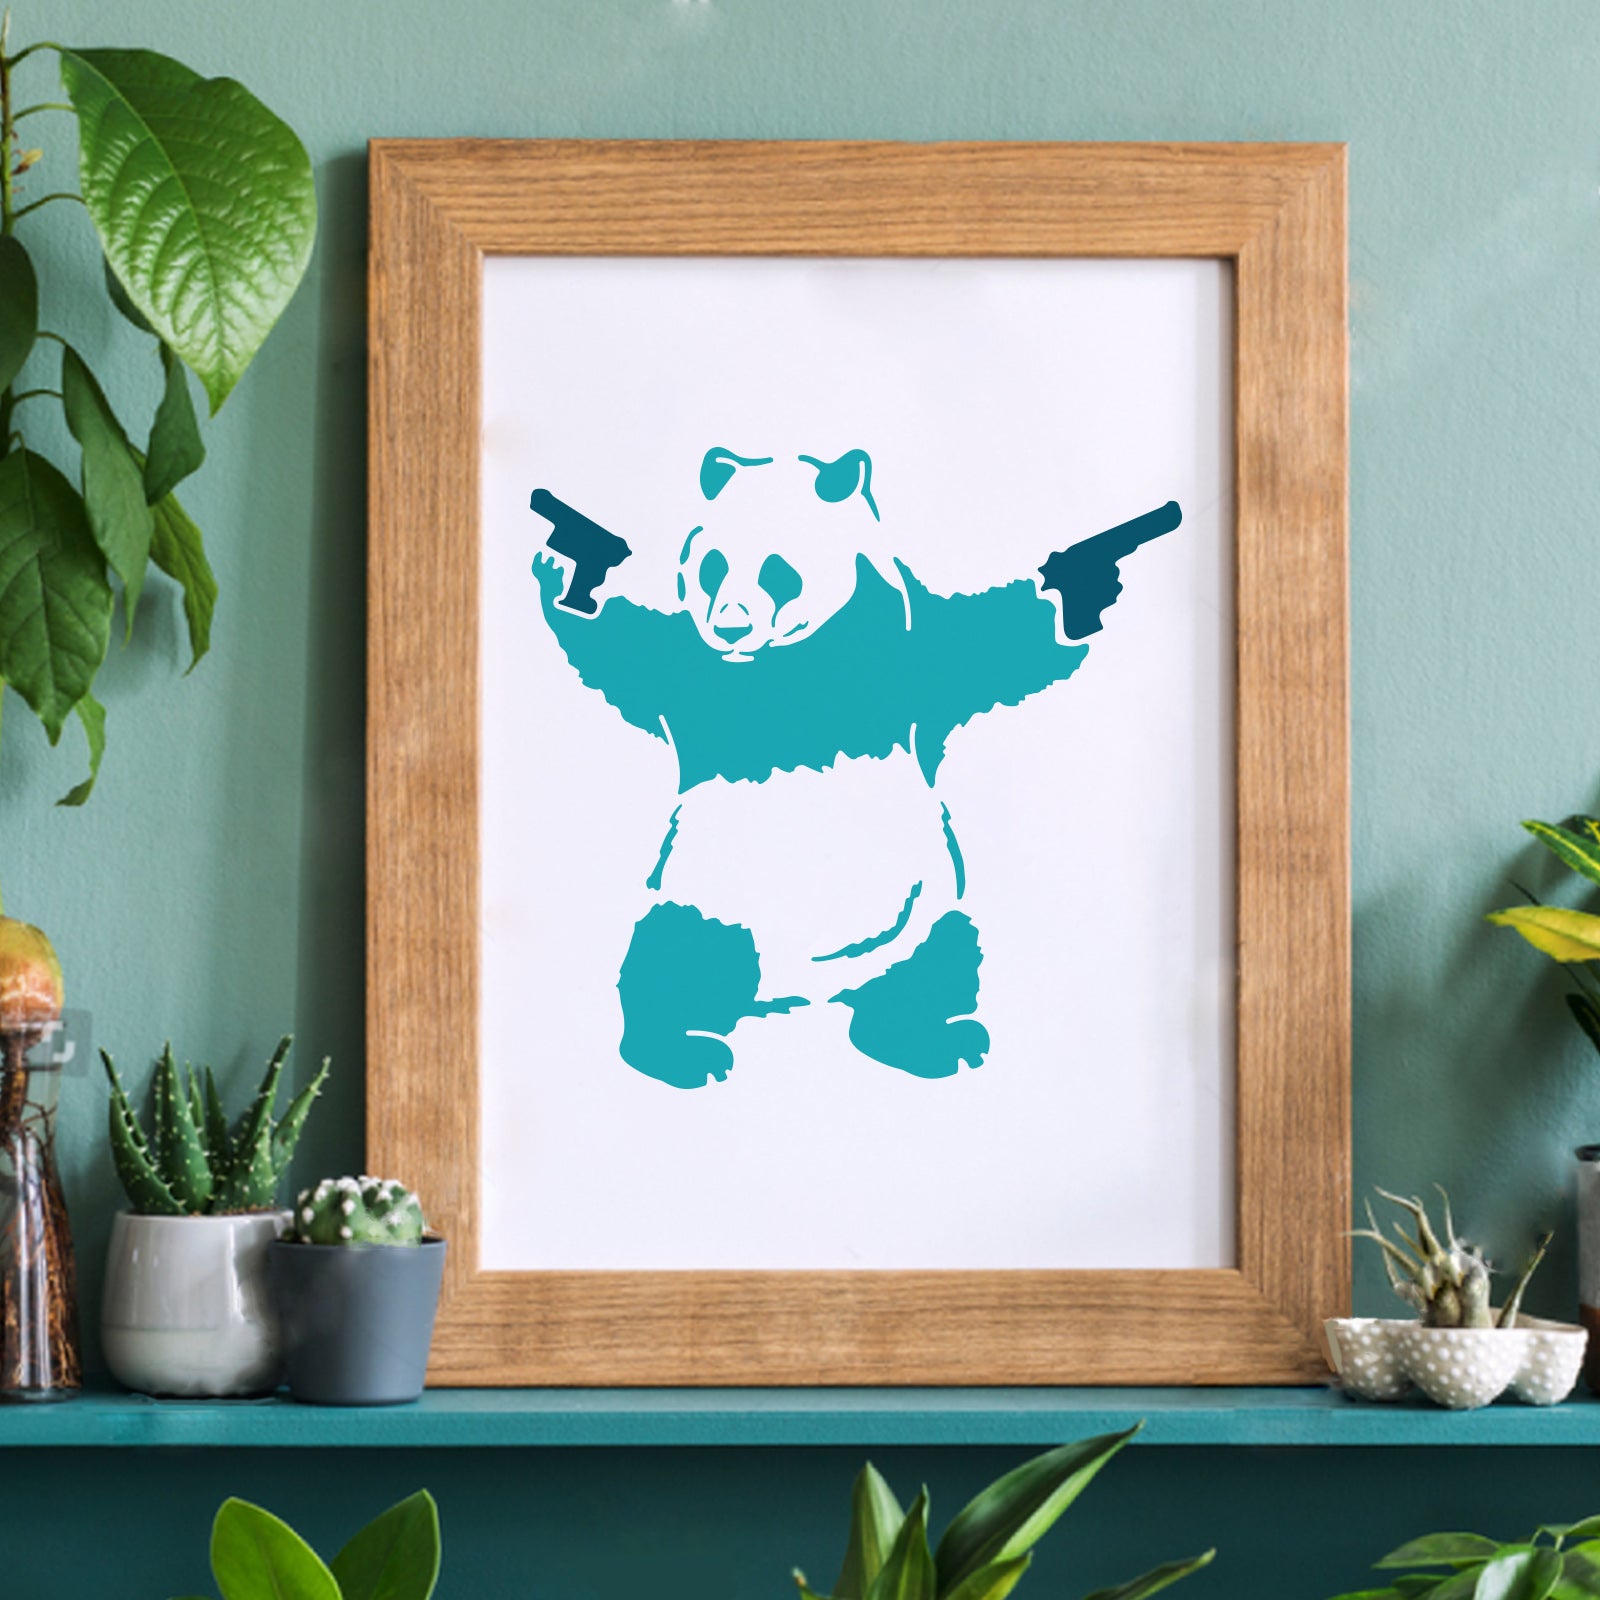 Globleland Plastic Reusable Drawing Painting Stencils Templates, for Painting on Scrapbook Paper Wall Fabric Floor Furniture Wood, Square, Panda Pattern, 300x300mm